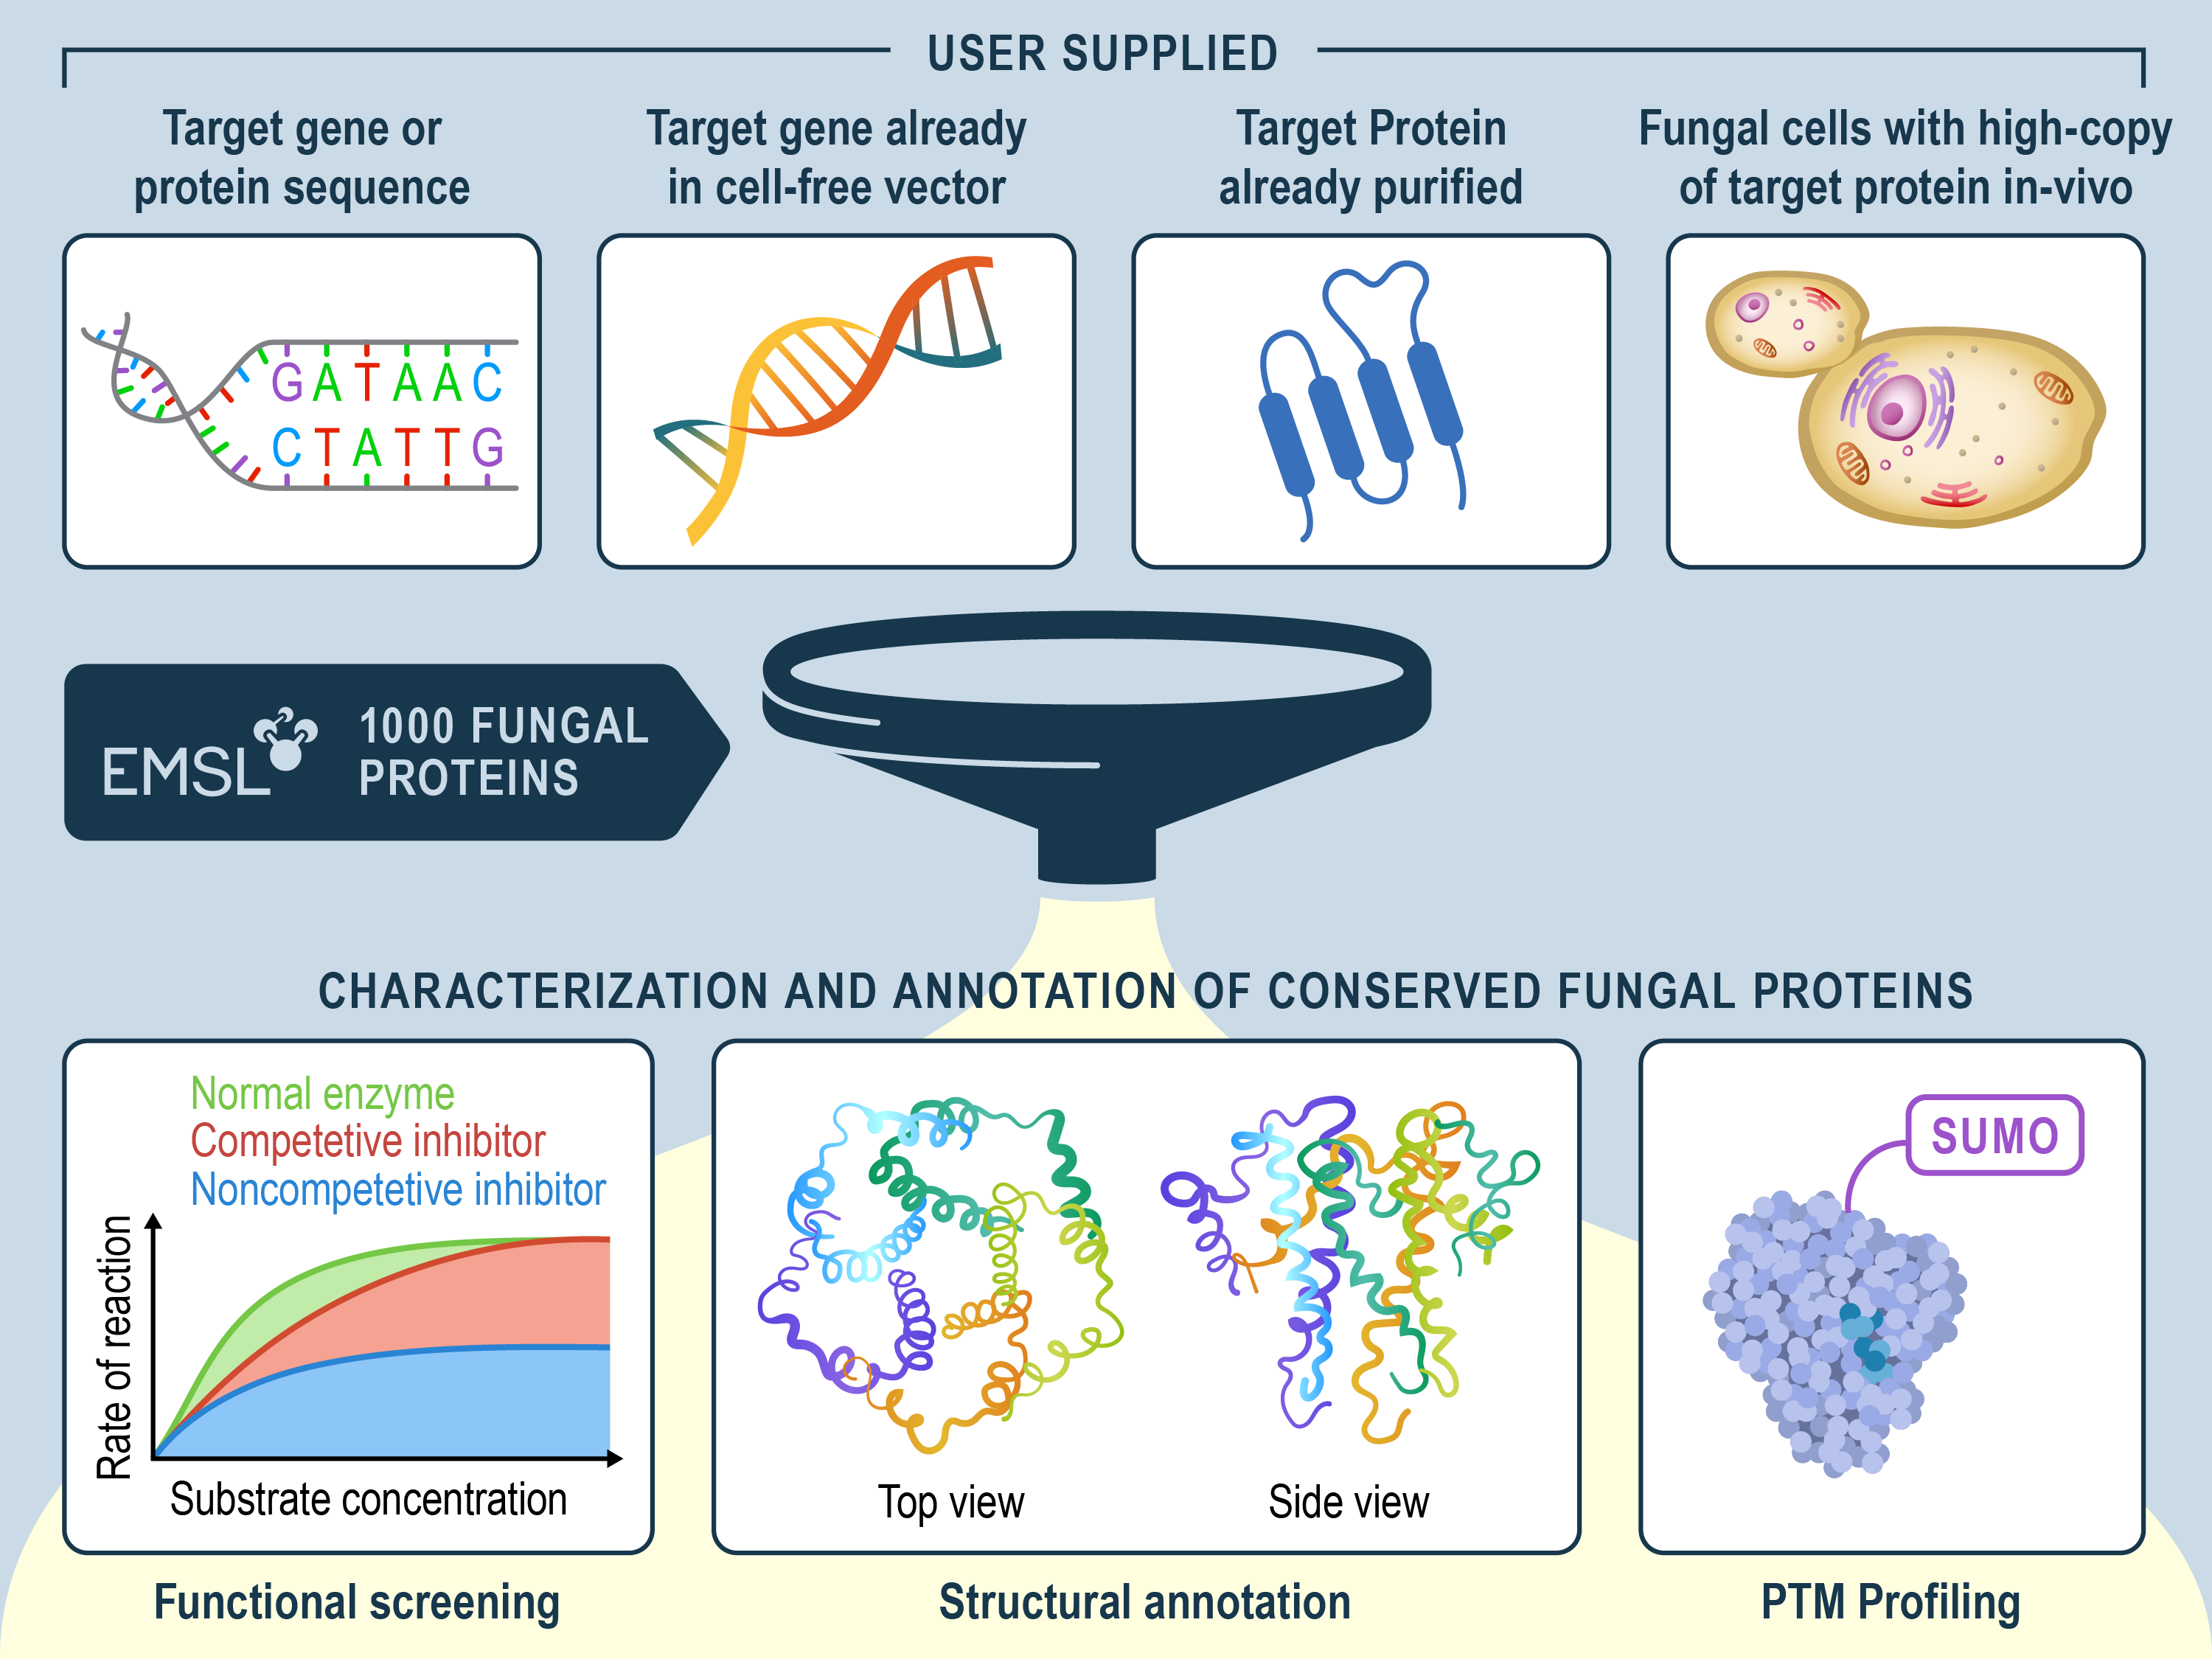 Process for Fungal Proteins